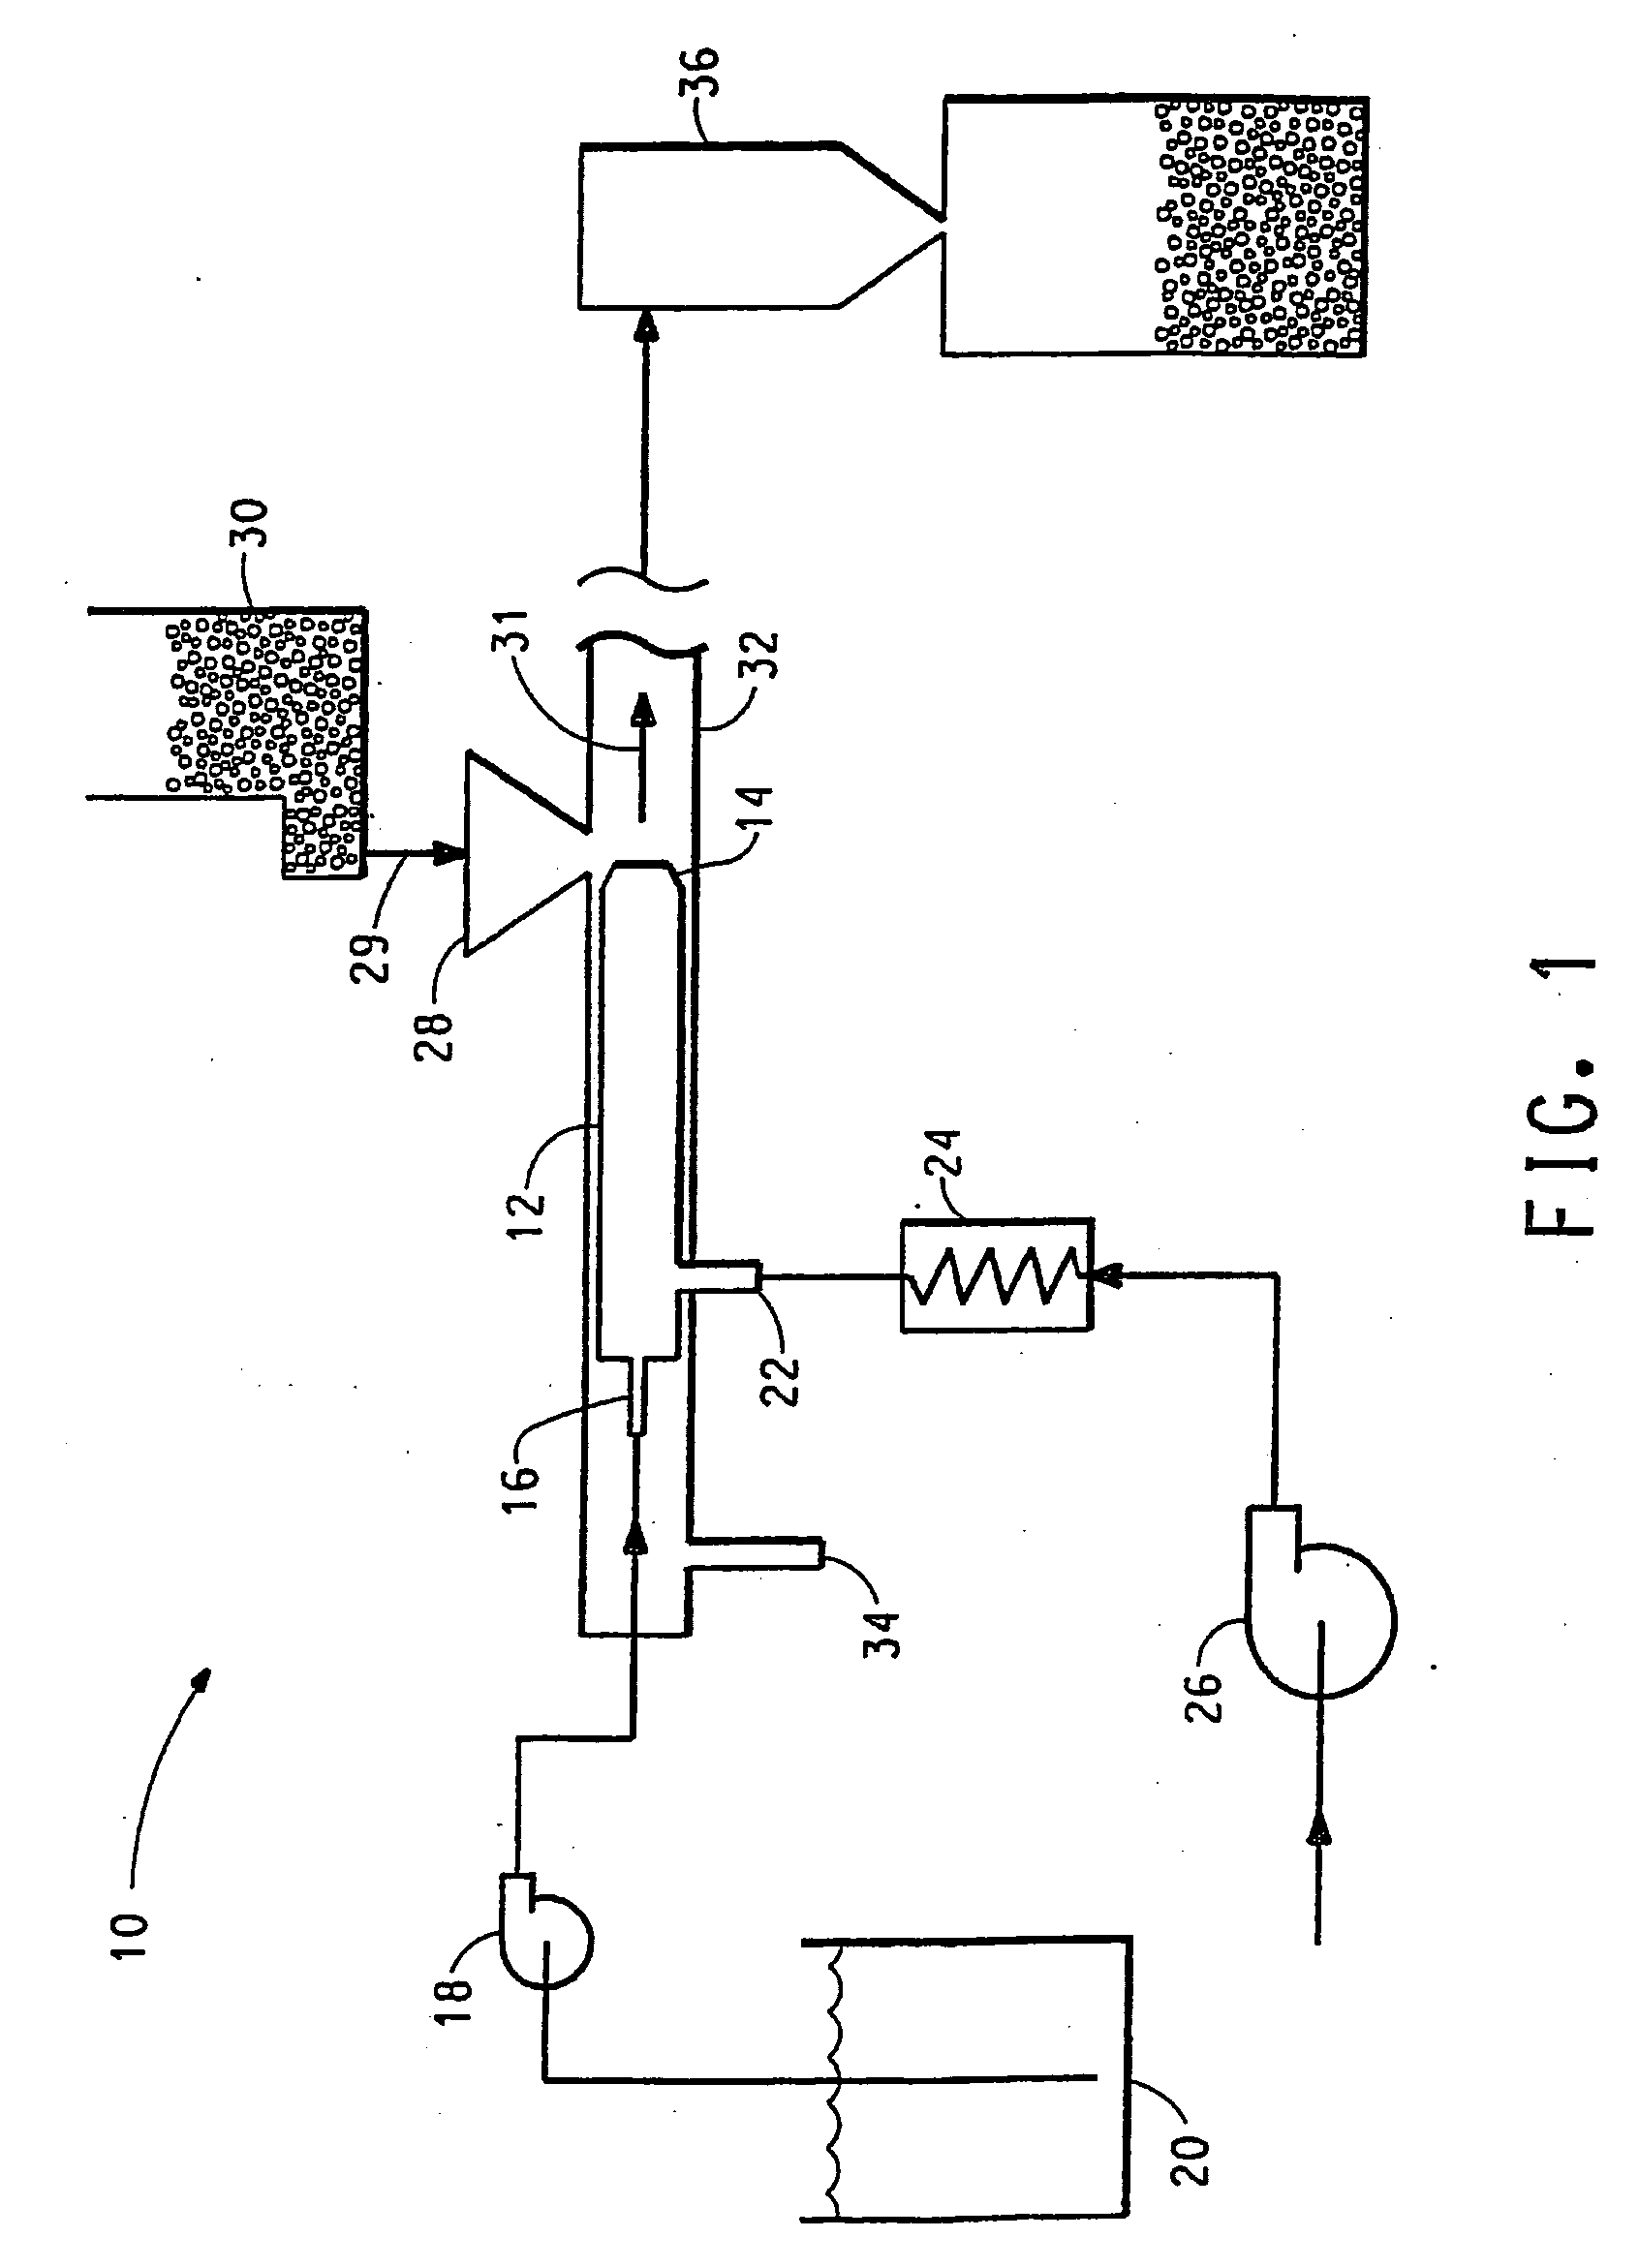 Coated polyunsaturated fatty acid-containing particles and coated liquid pharmaceutical-containing particles